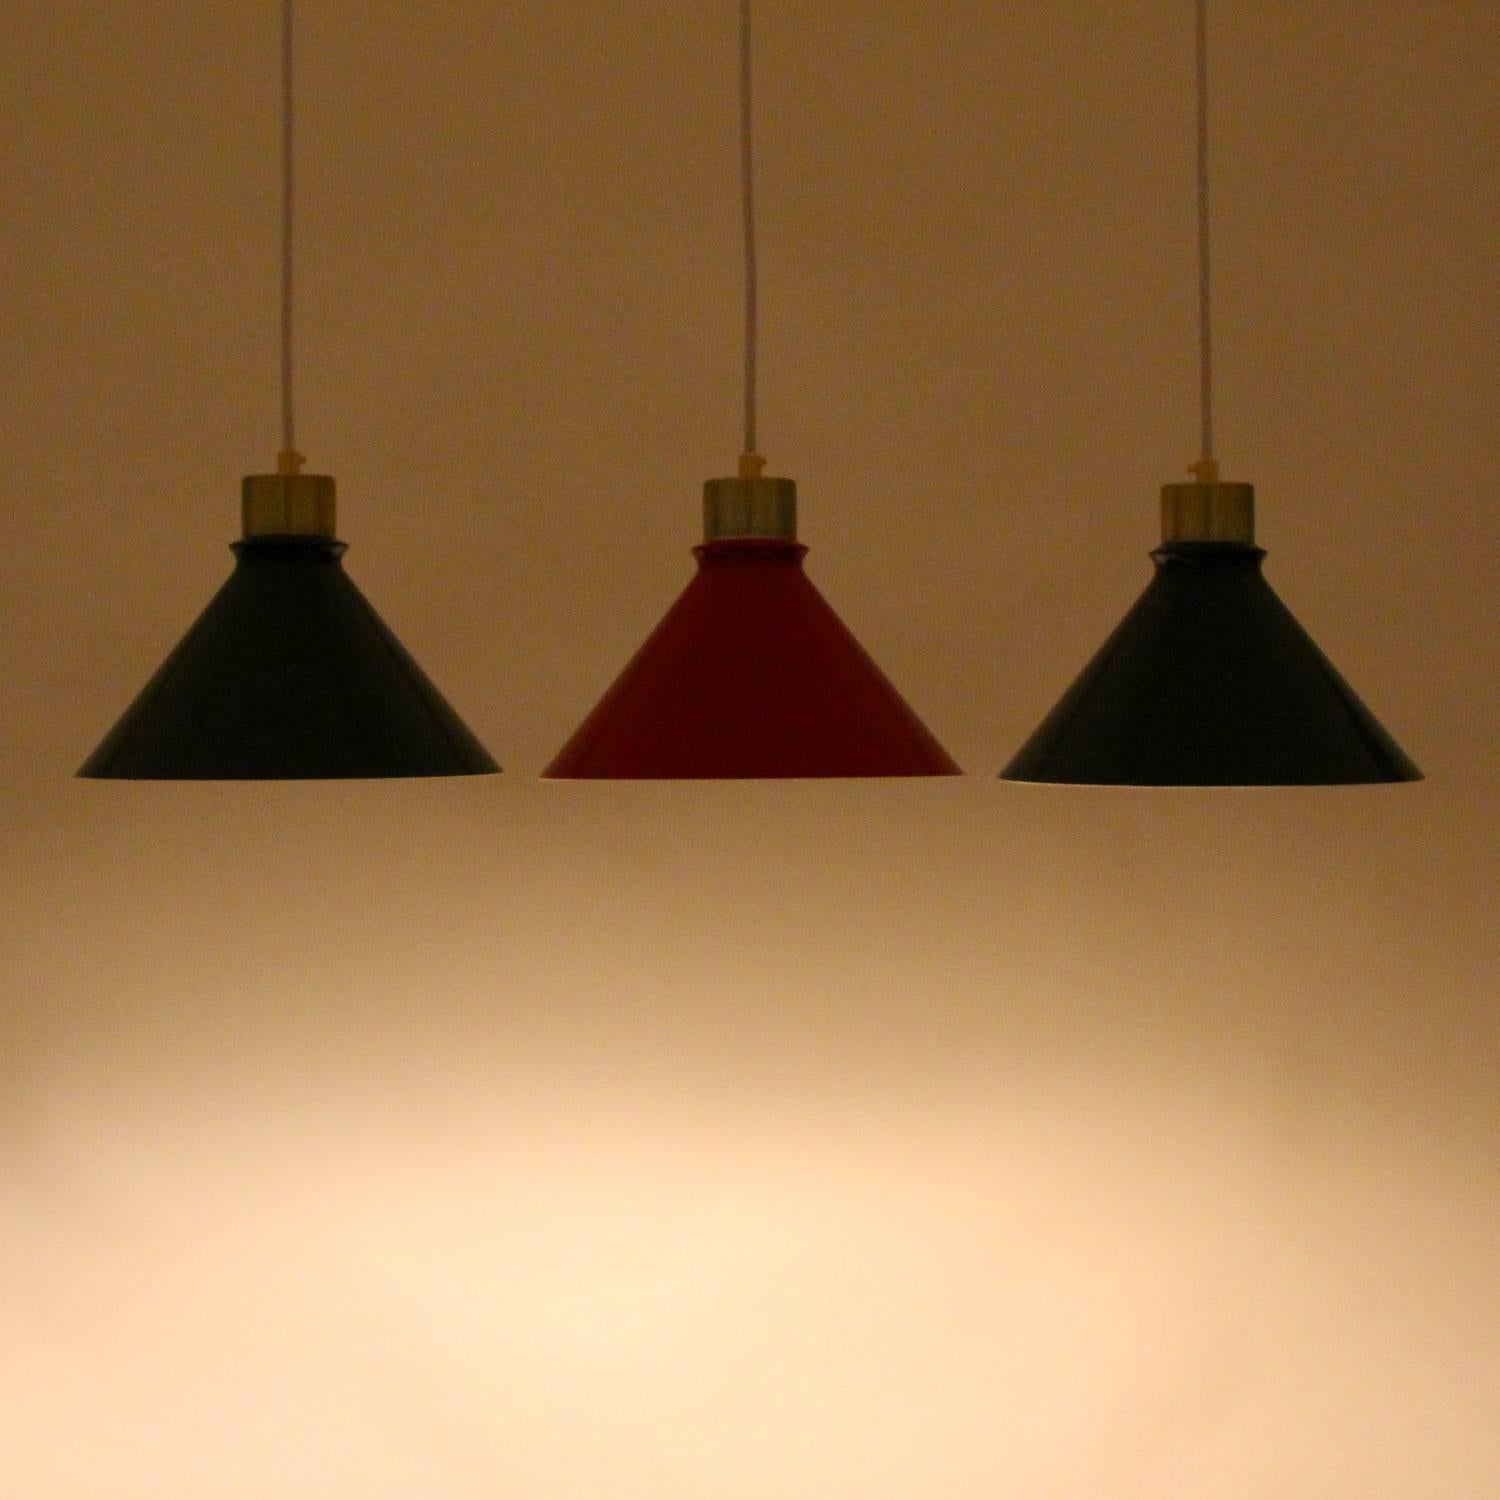 Metal pendant lights (set of three), 1960s Danish modern ceiling lights with green and red enamel and brass lacquered tops by unknown producer.

A stylish set of enameled metal pendants, each pyramid shaped with a cylindrical brass lacquered top.